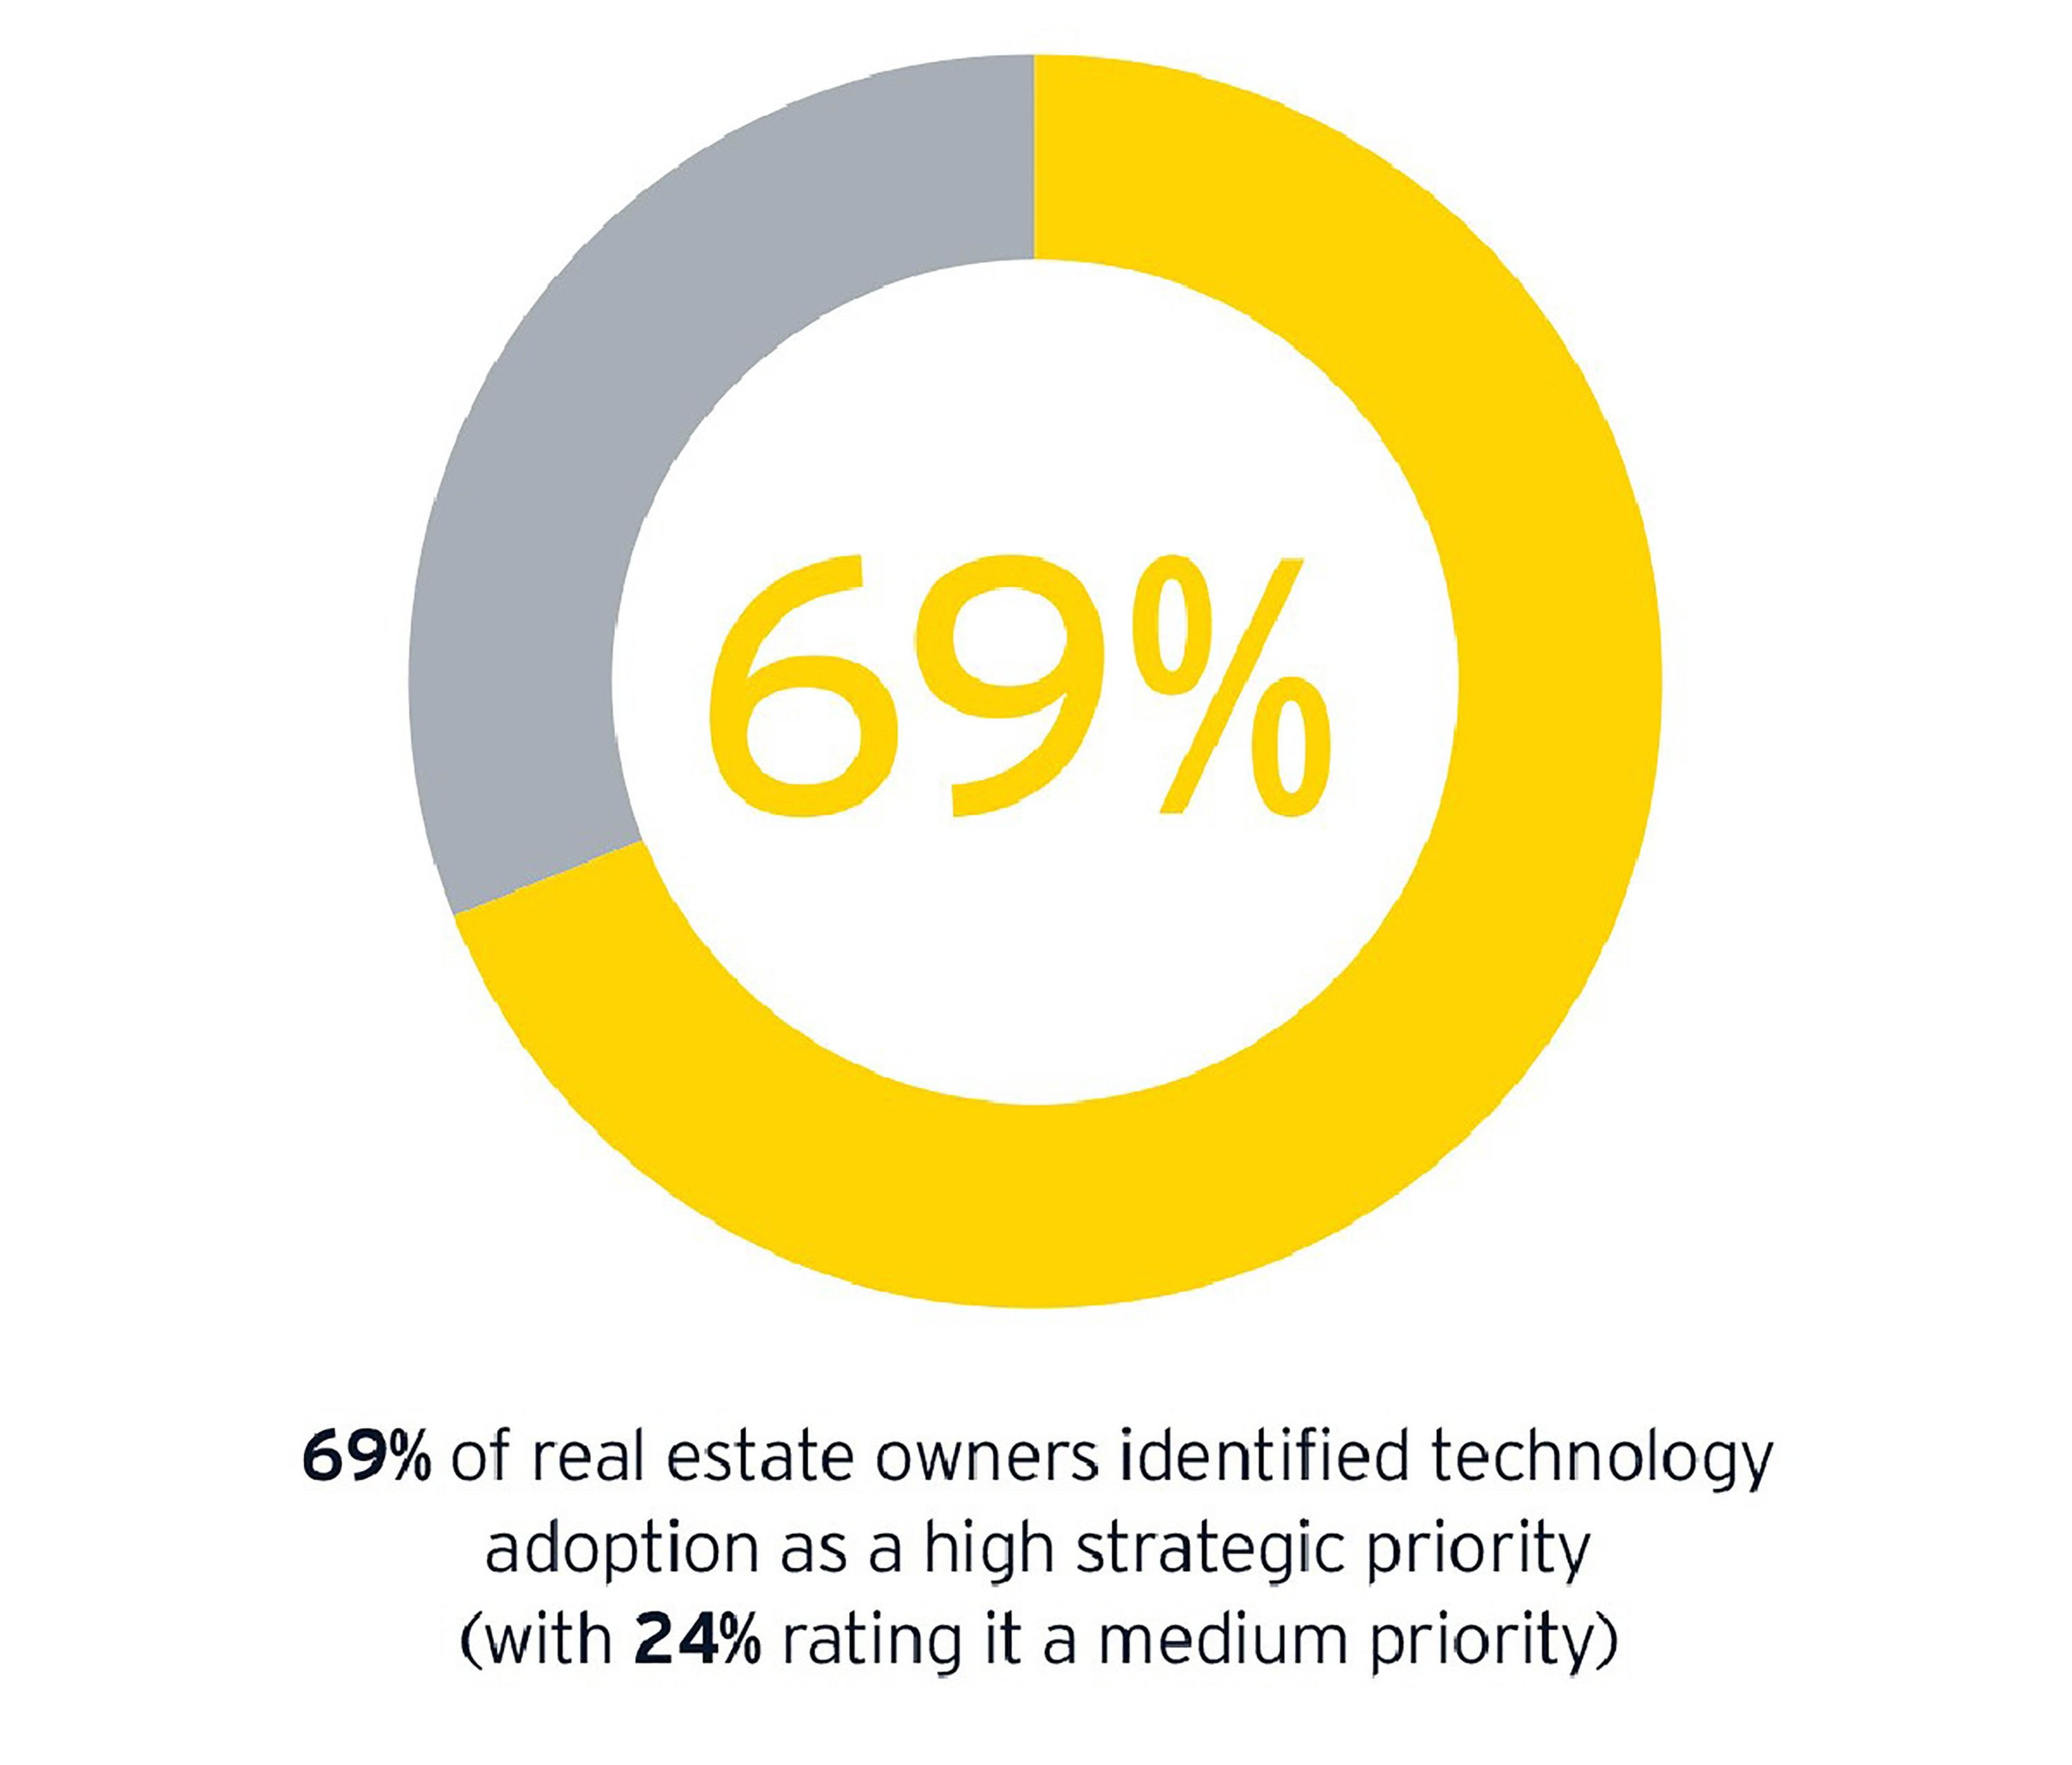 69% of real estate owners identified technology adoption as priority